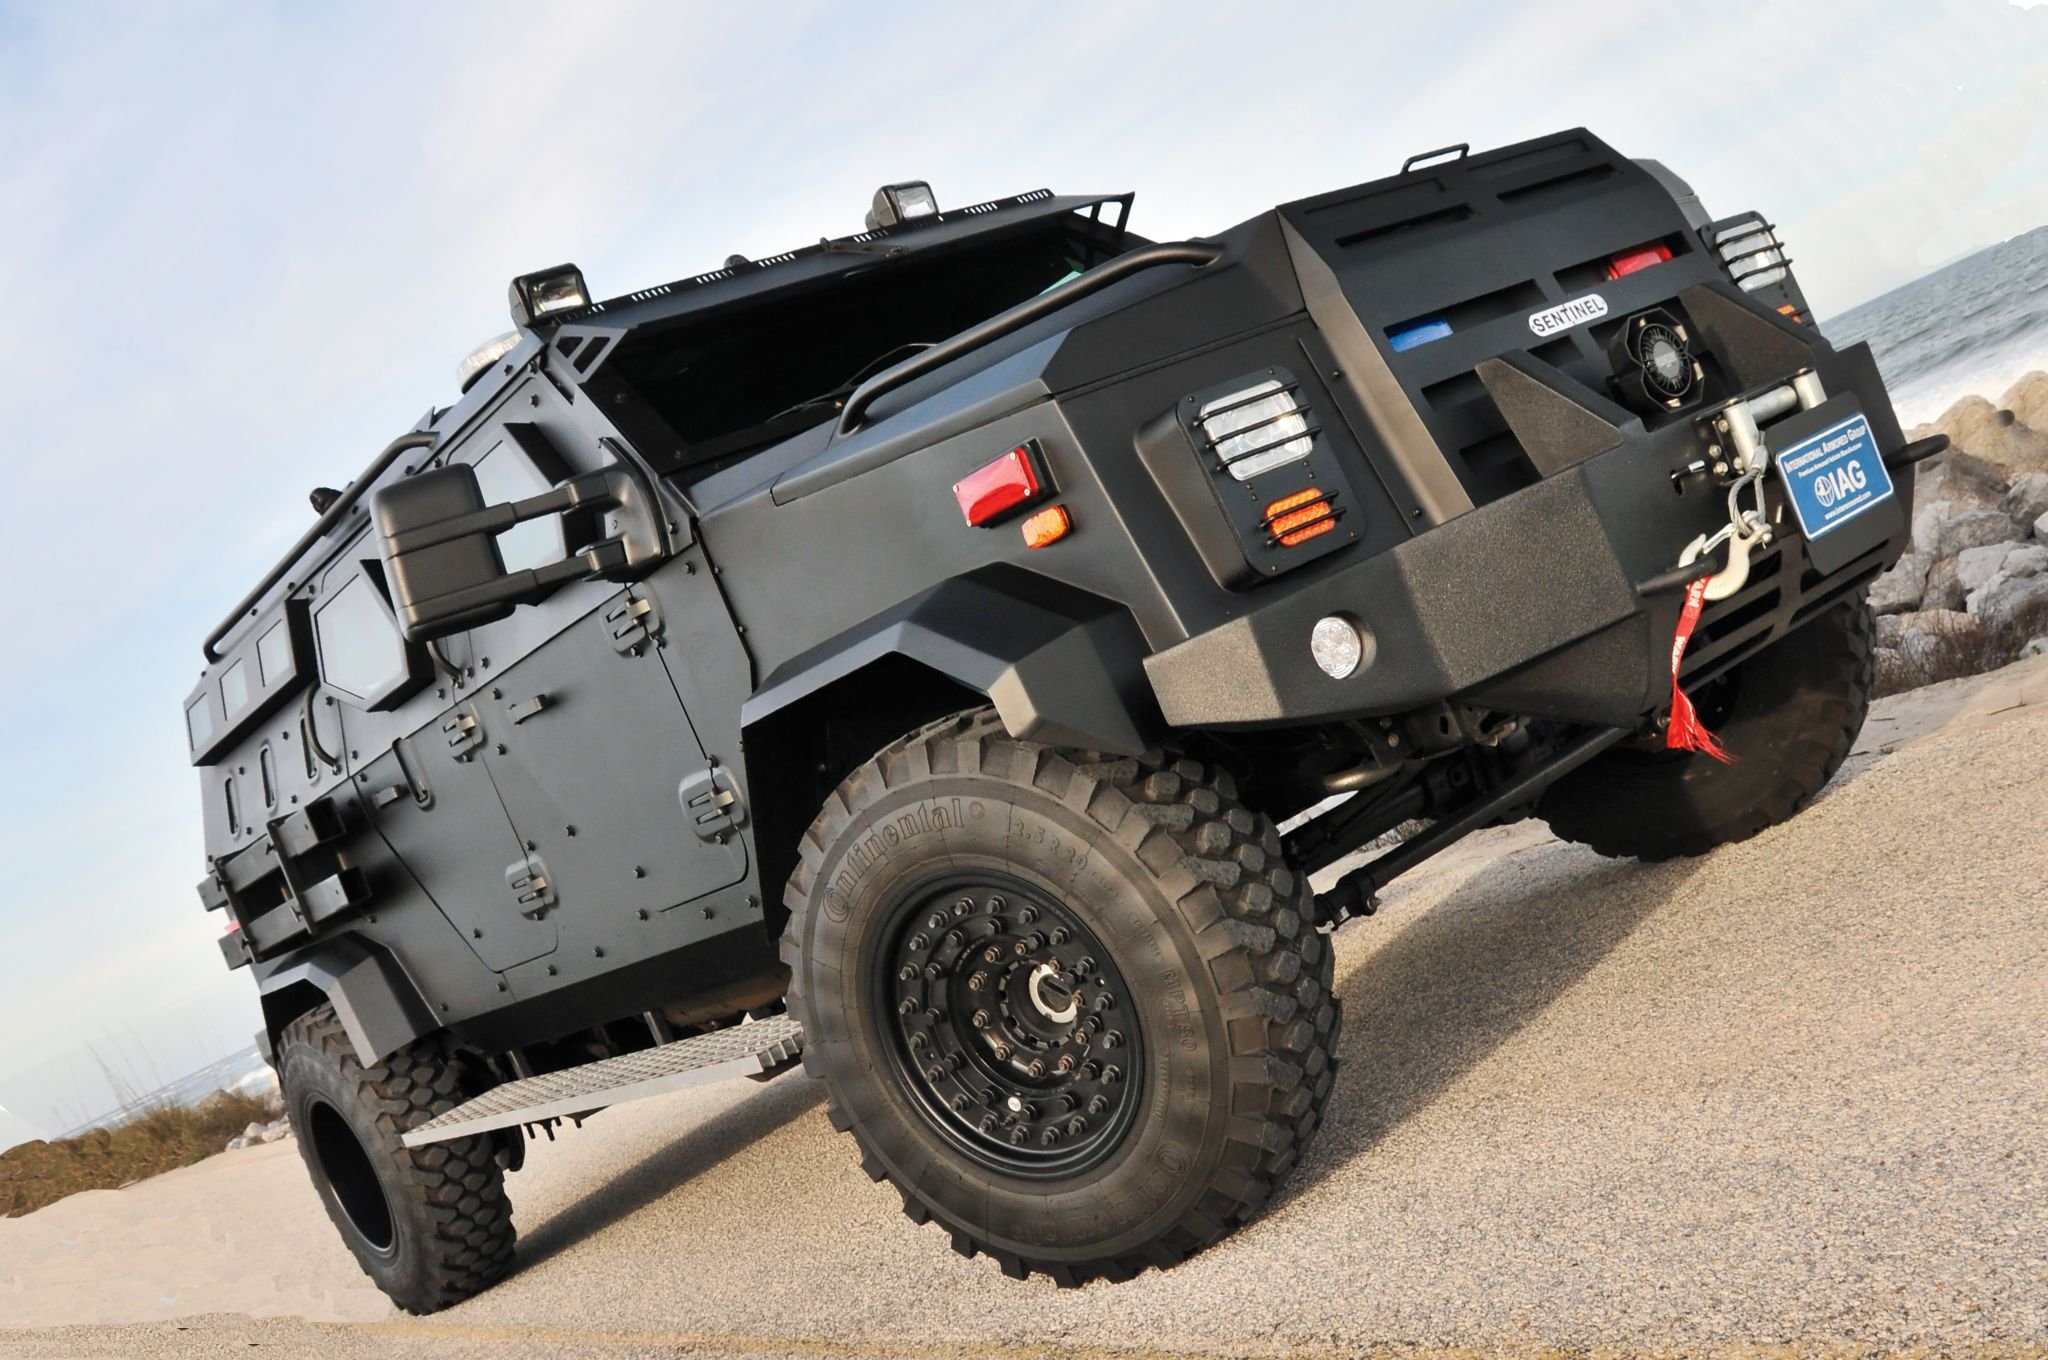 sentinel, Tactical, Response, Vehicle, 4x4, Armored, Emergency, Military, Police, Swat Wallpaper